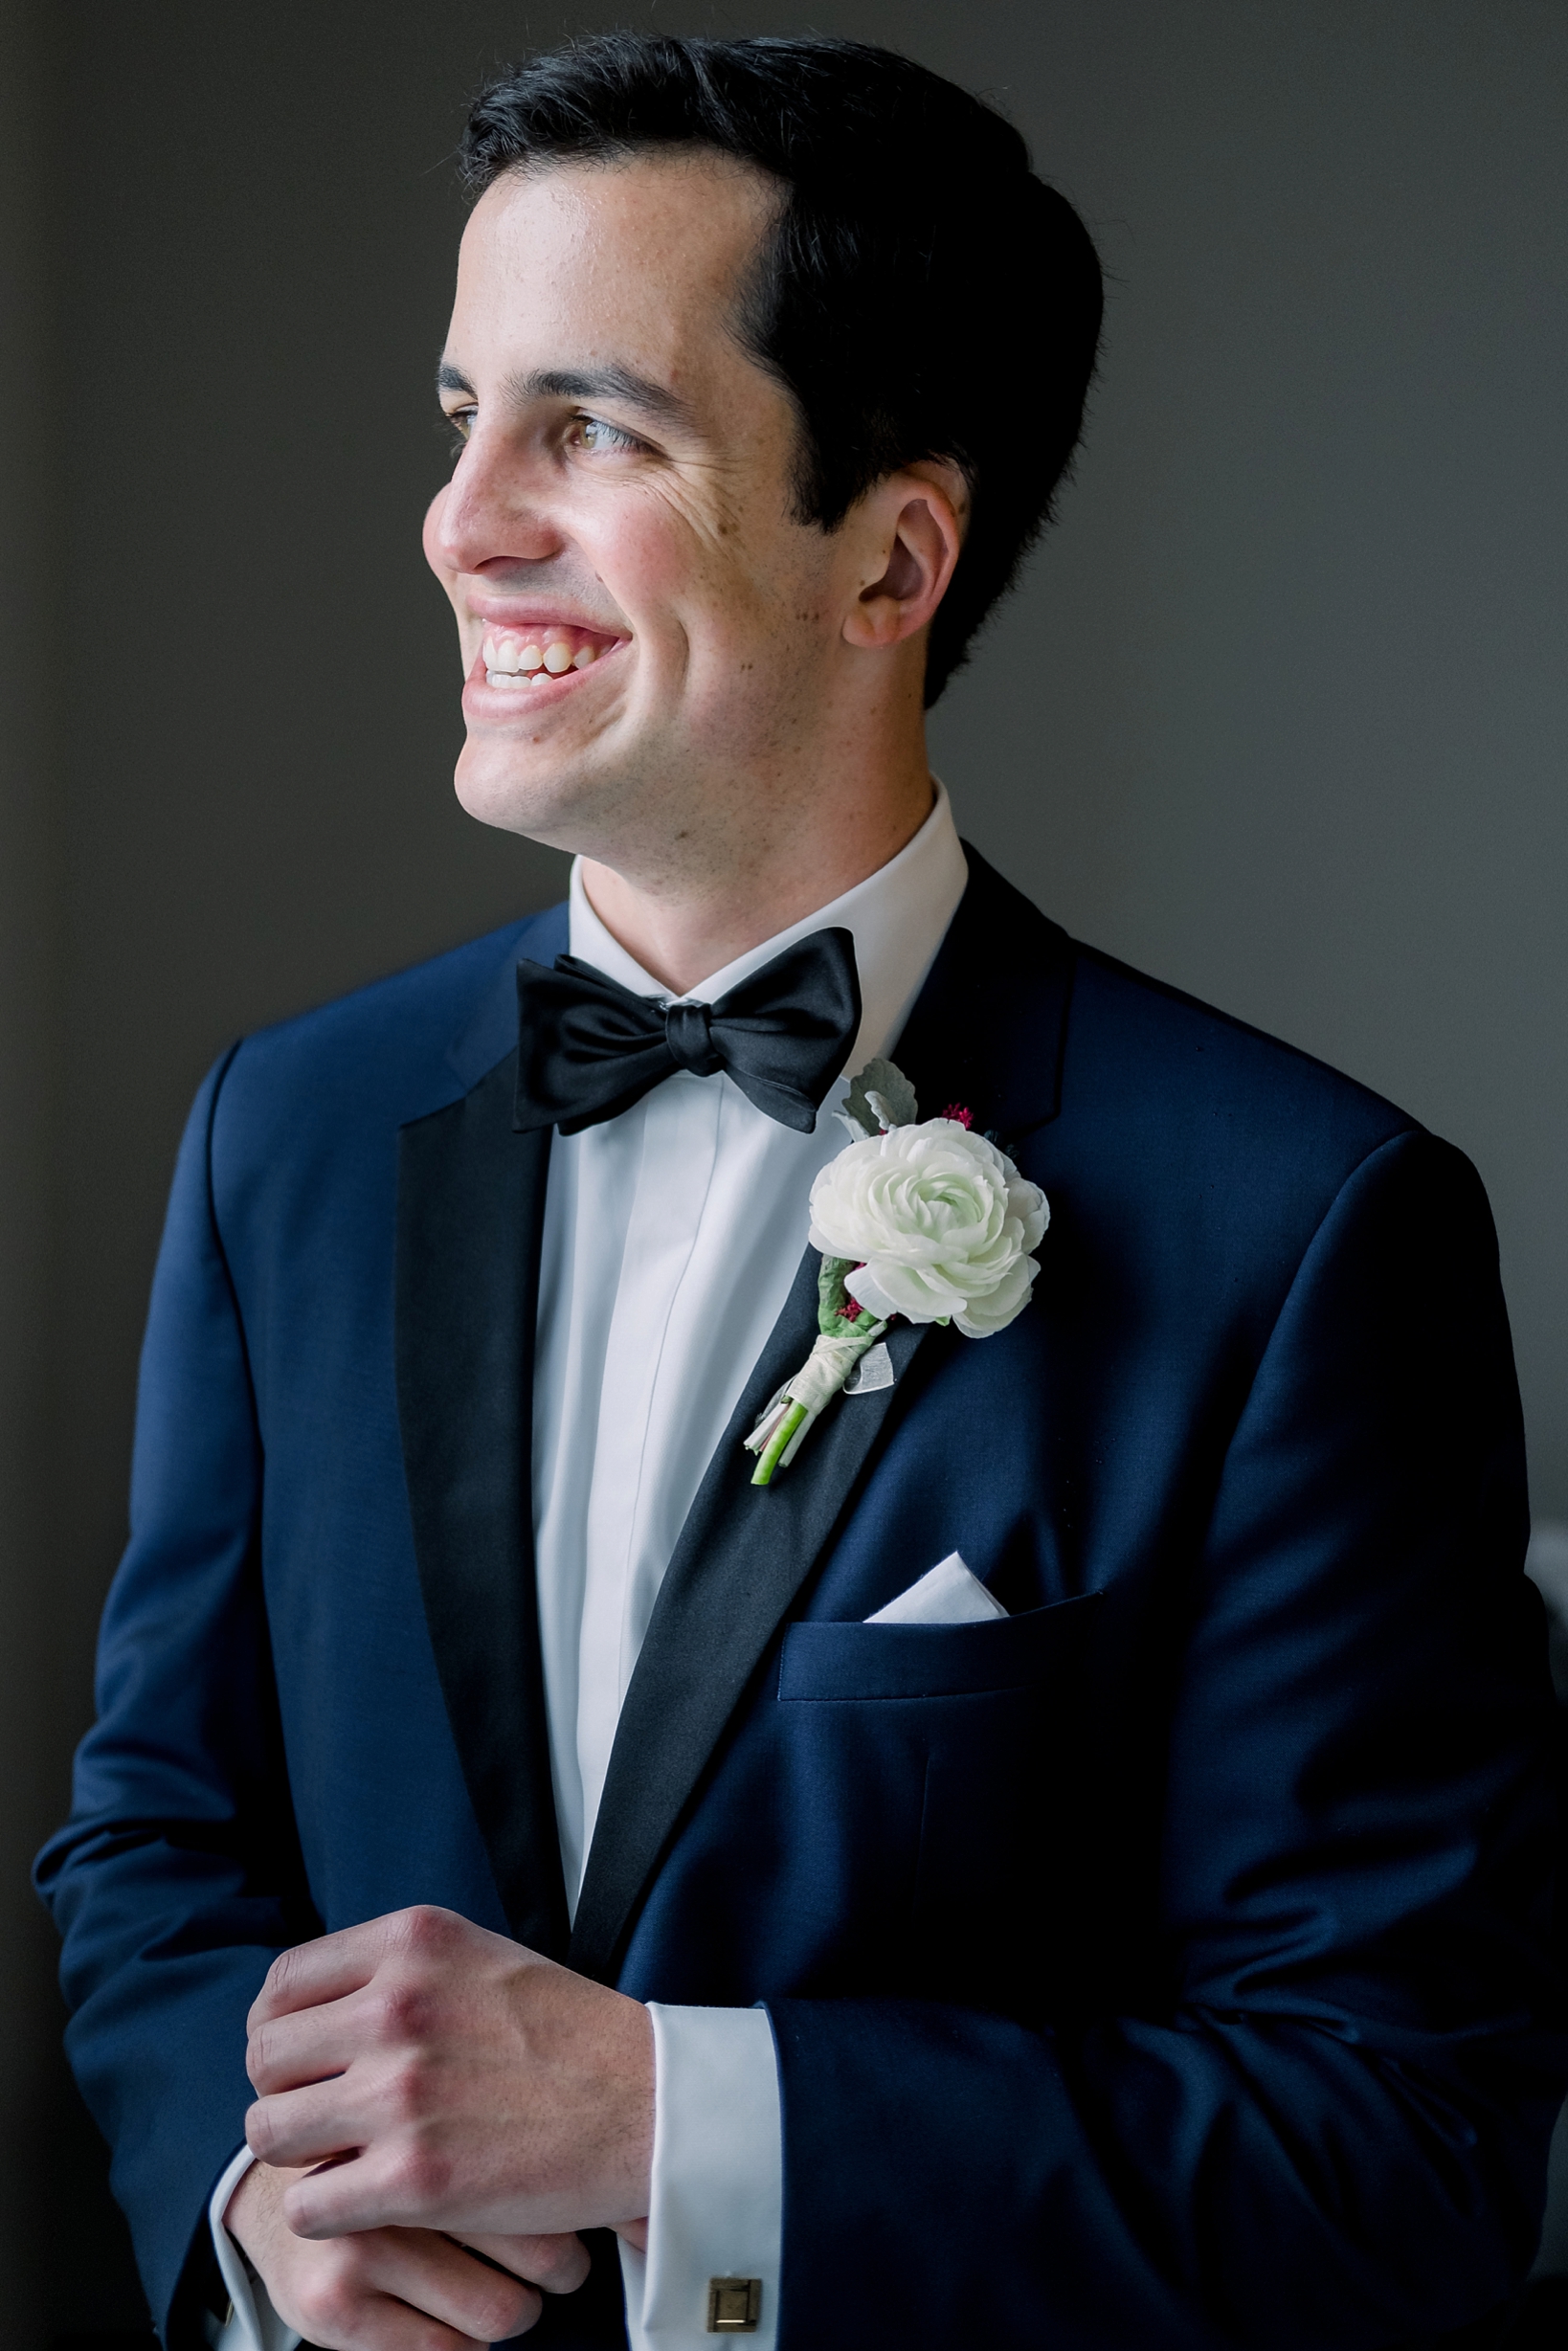 A classic portrait of the groom in his navy suit by Sarah & Ben Photography